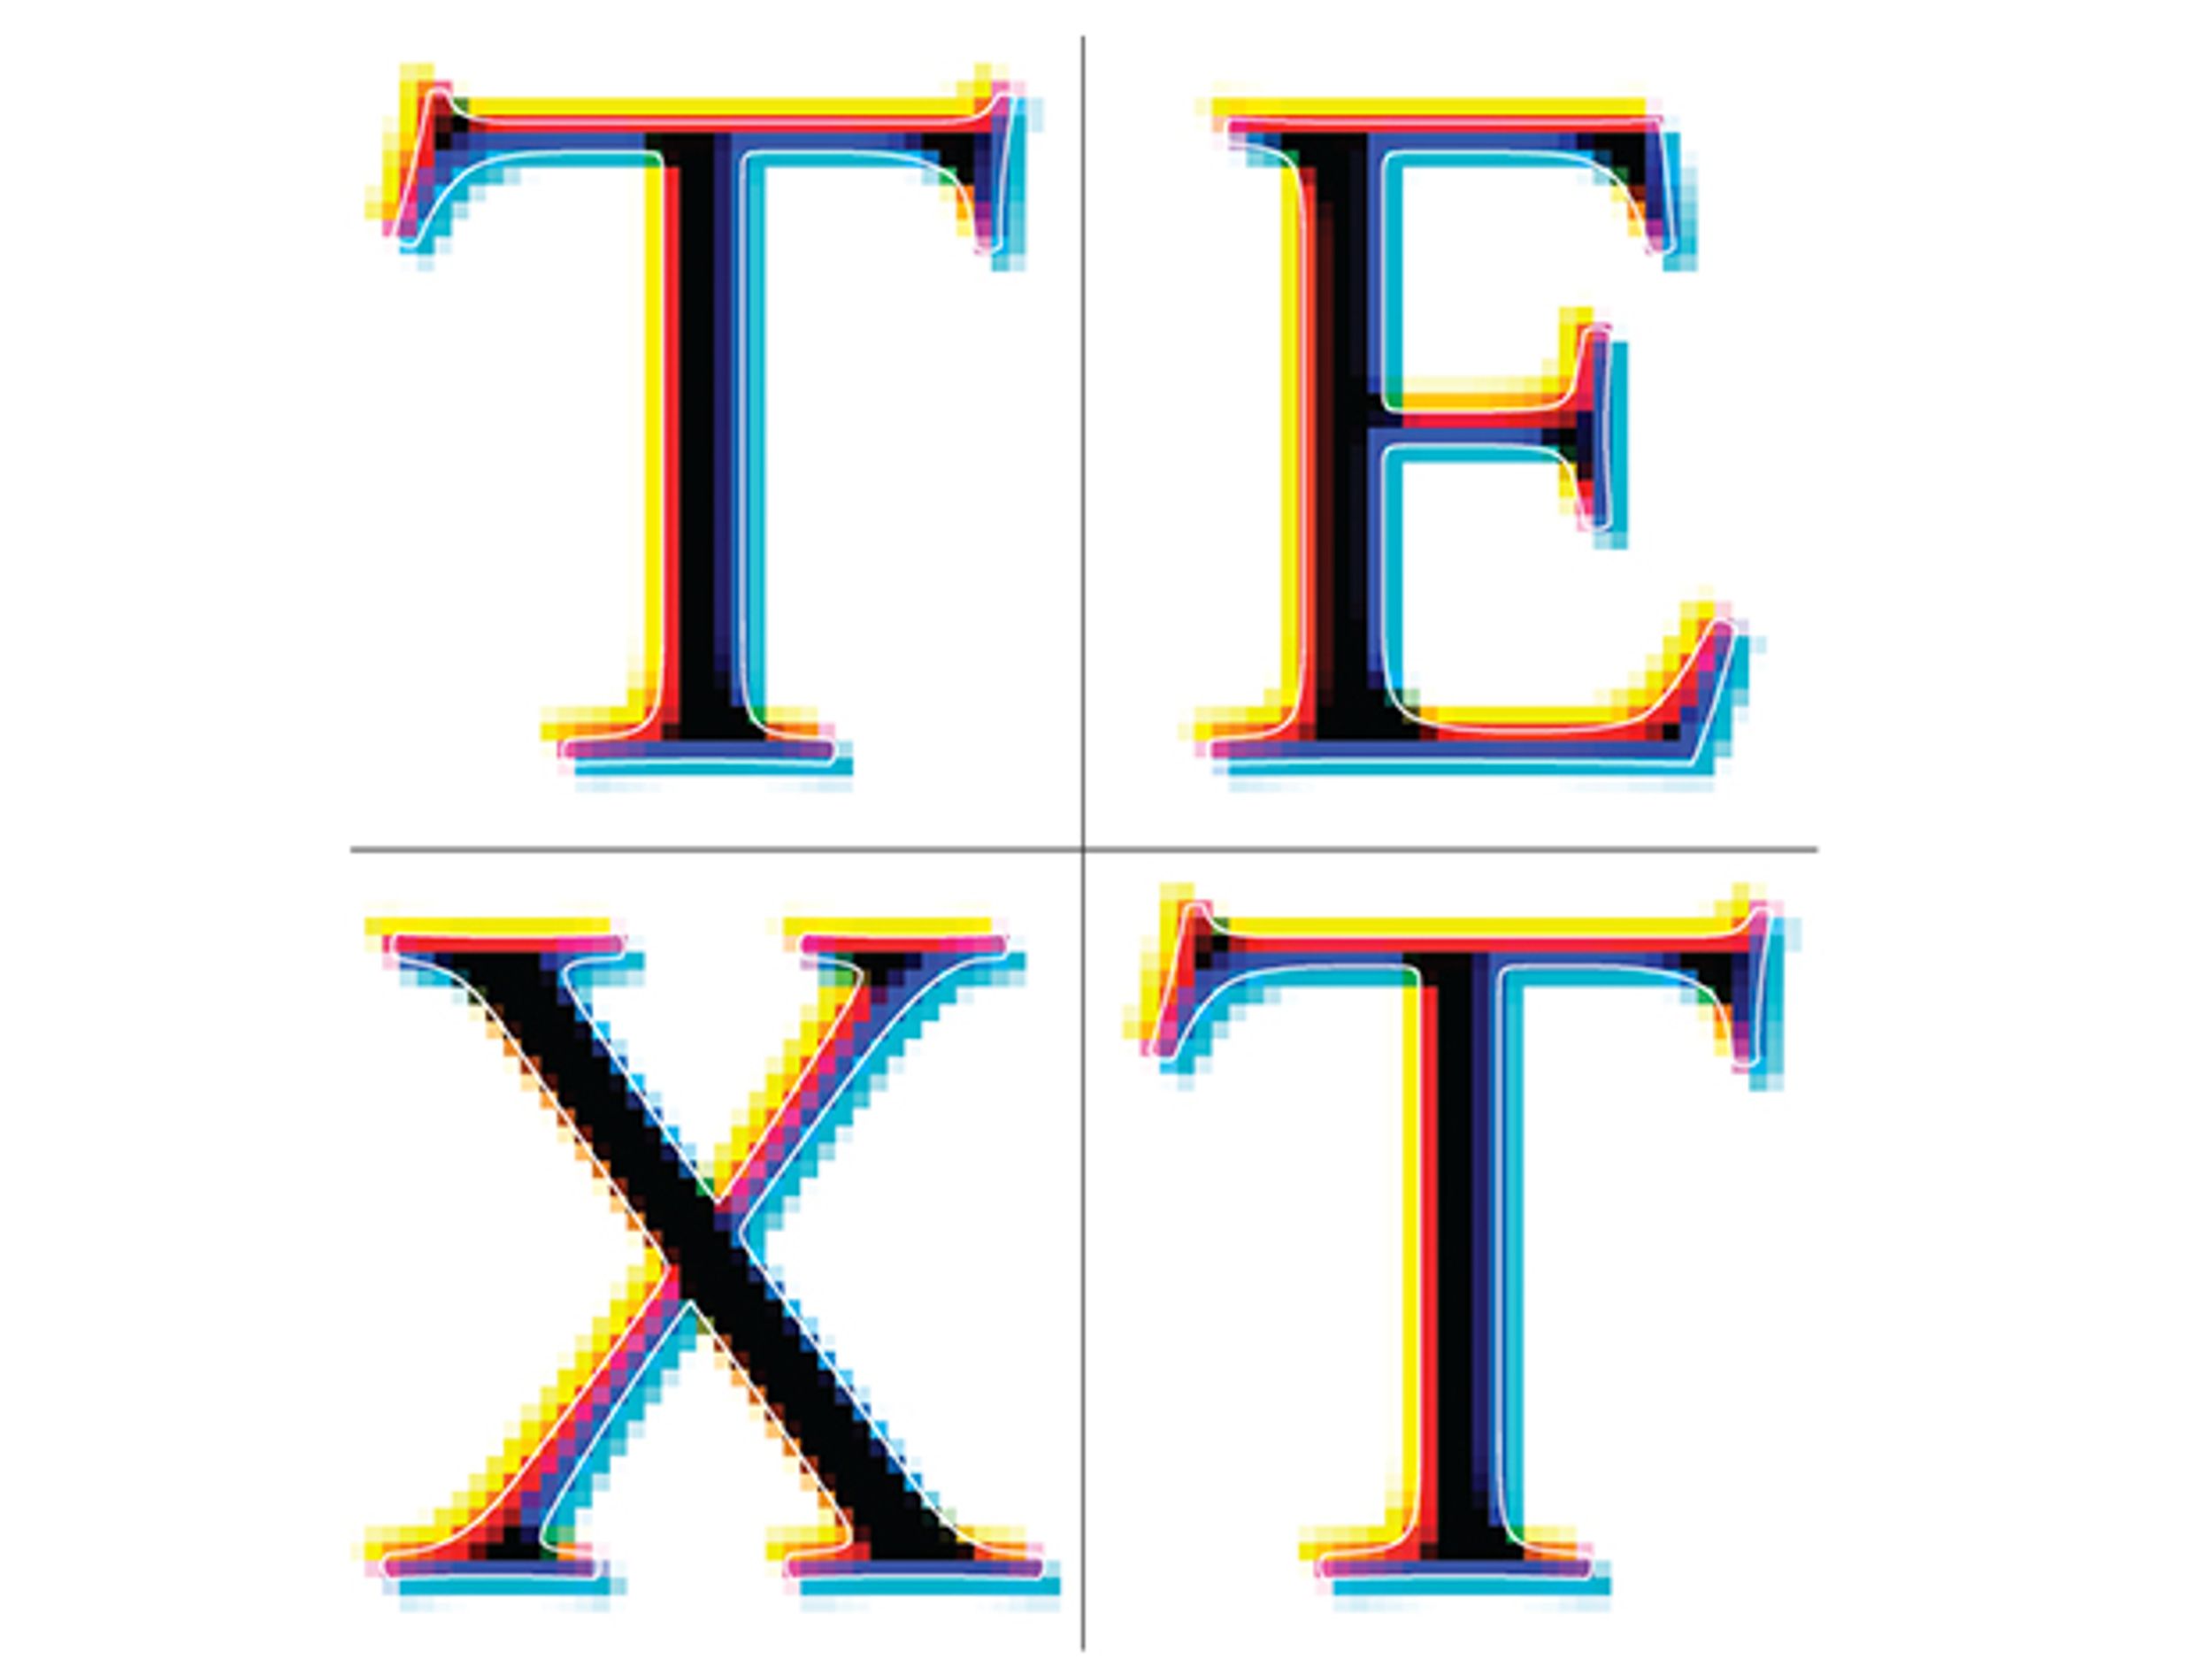 An illustration of the word “text” rendered in different ways.